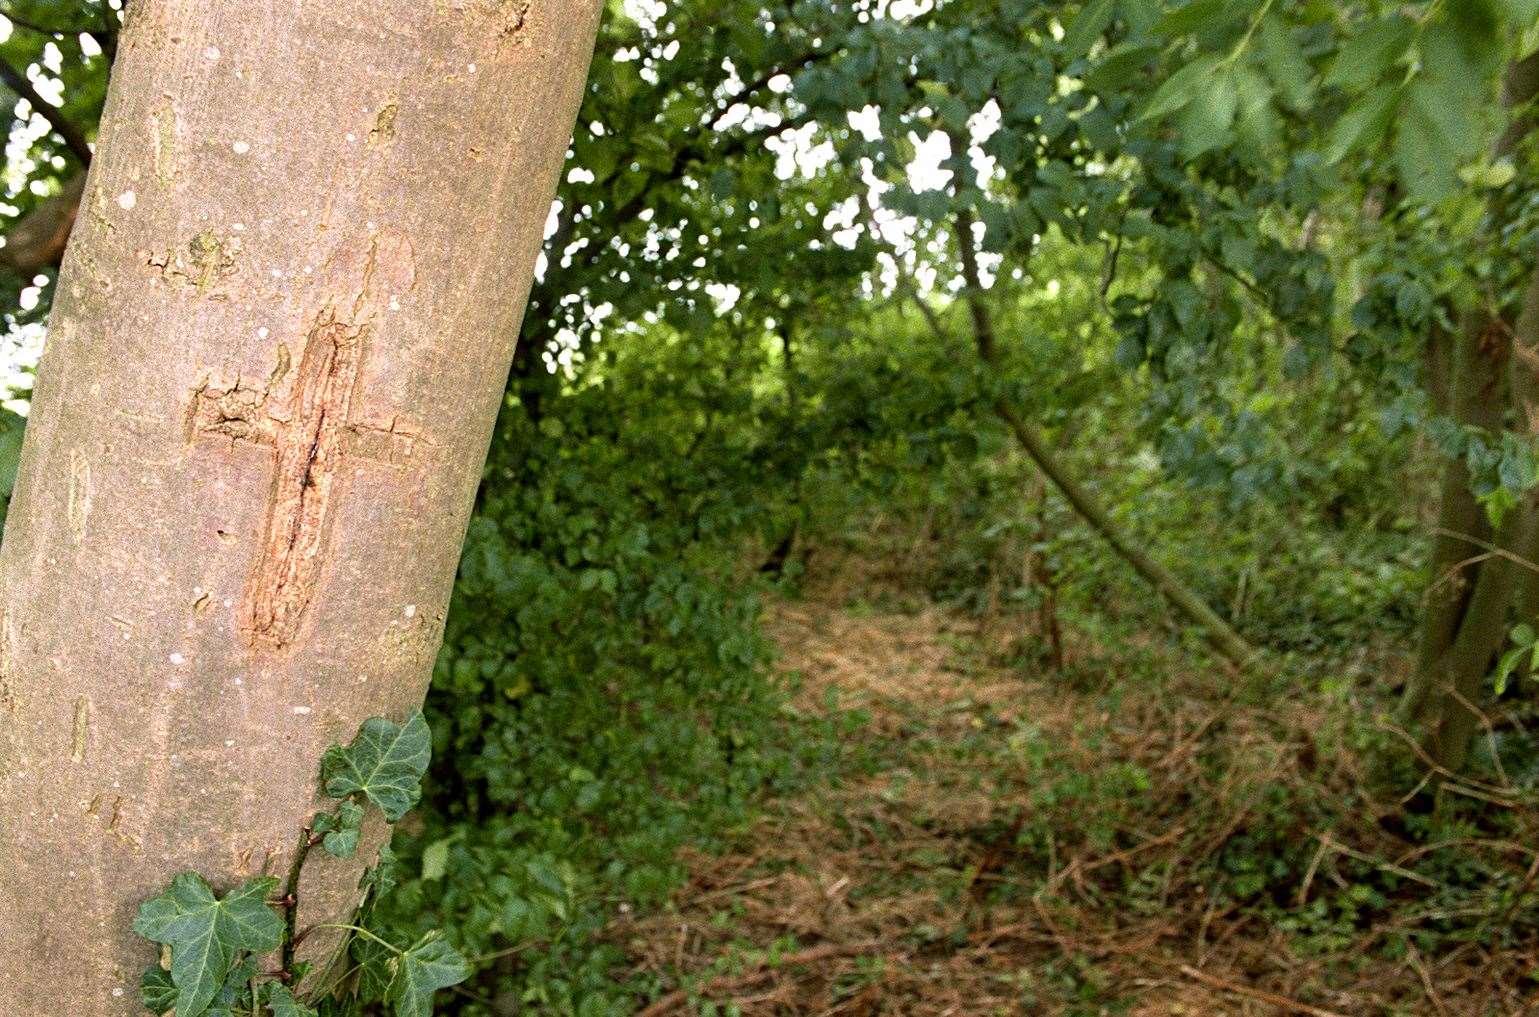 A cross carved into a tree near the scene of the killings